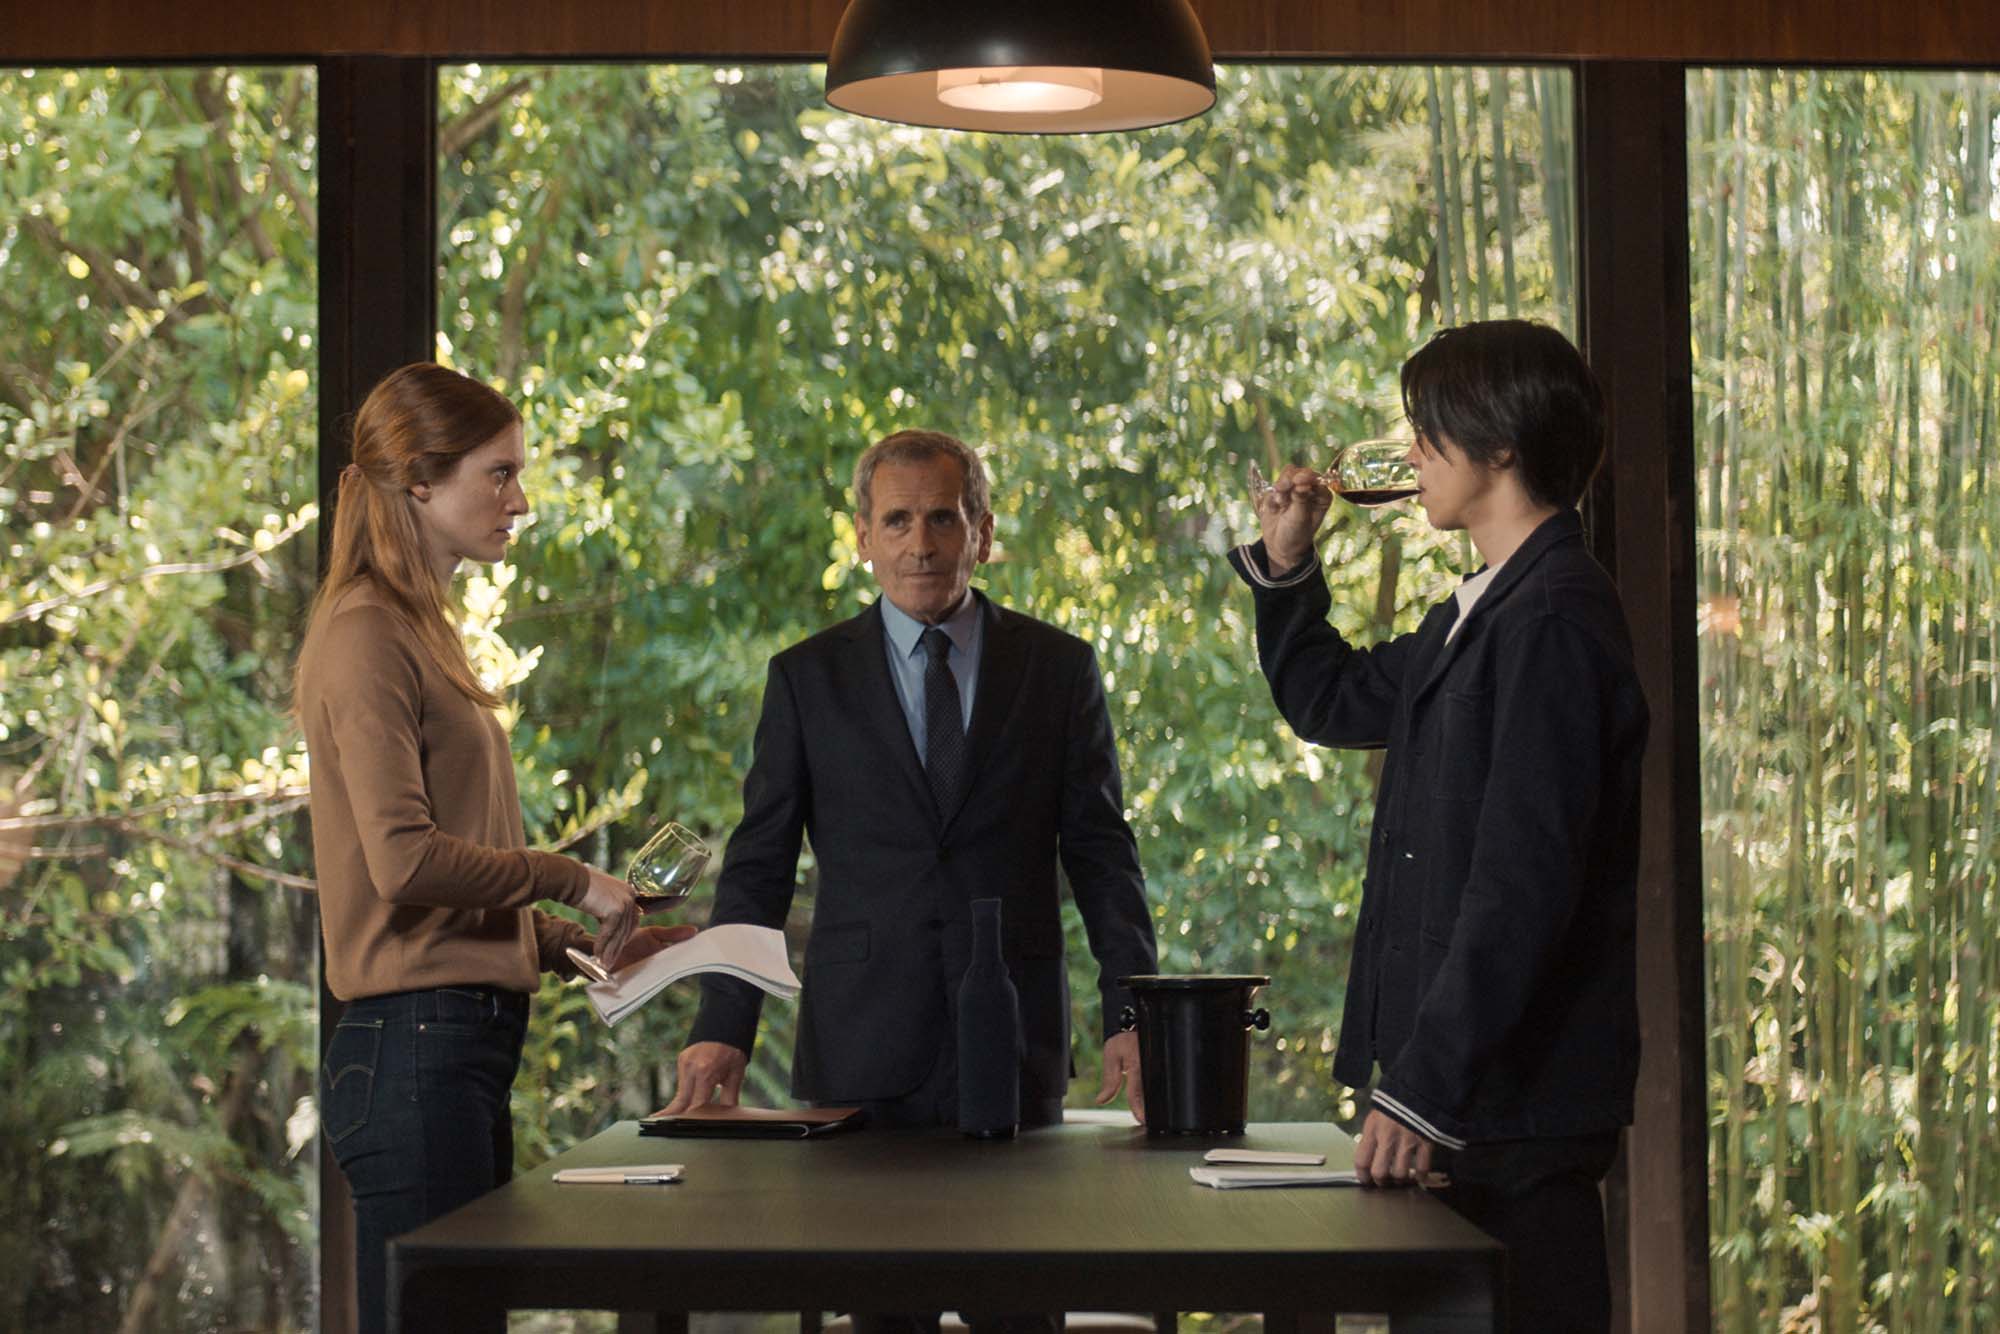 A white woman and Japanese woman taste wine while standing across a table from each other. A man in a suit looks on; the backdrop outside the window is very verdant and green.